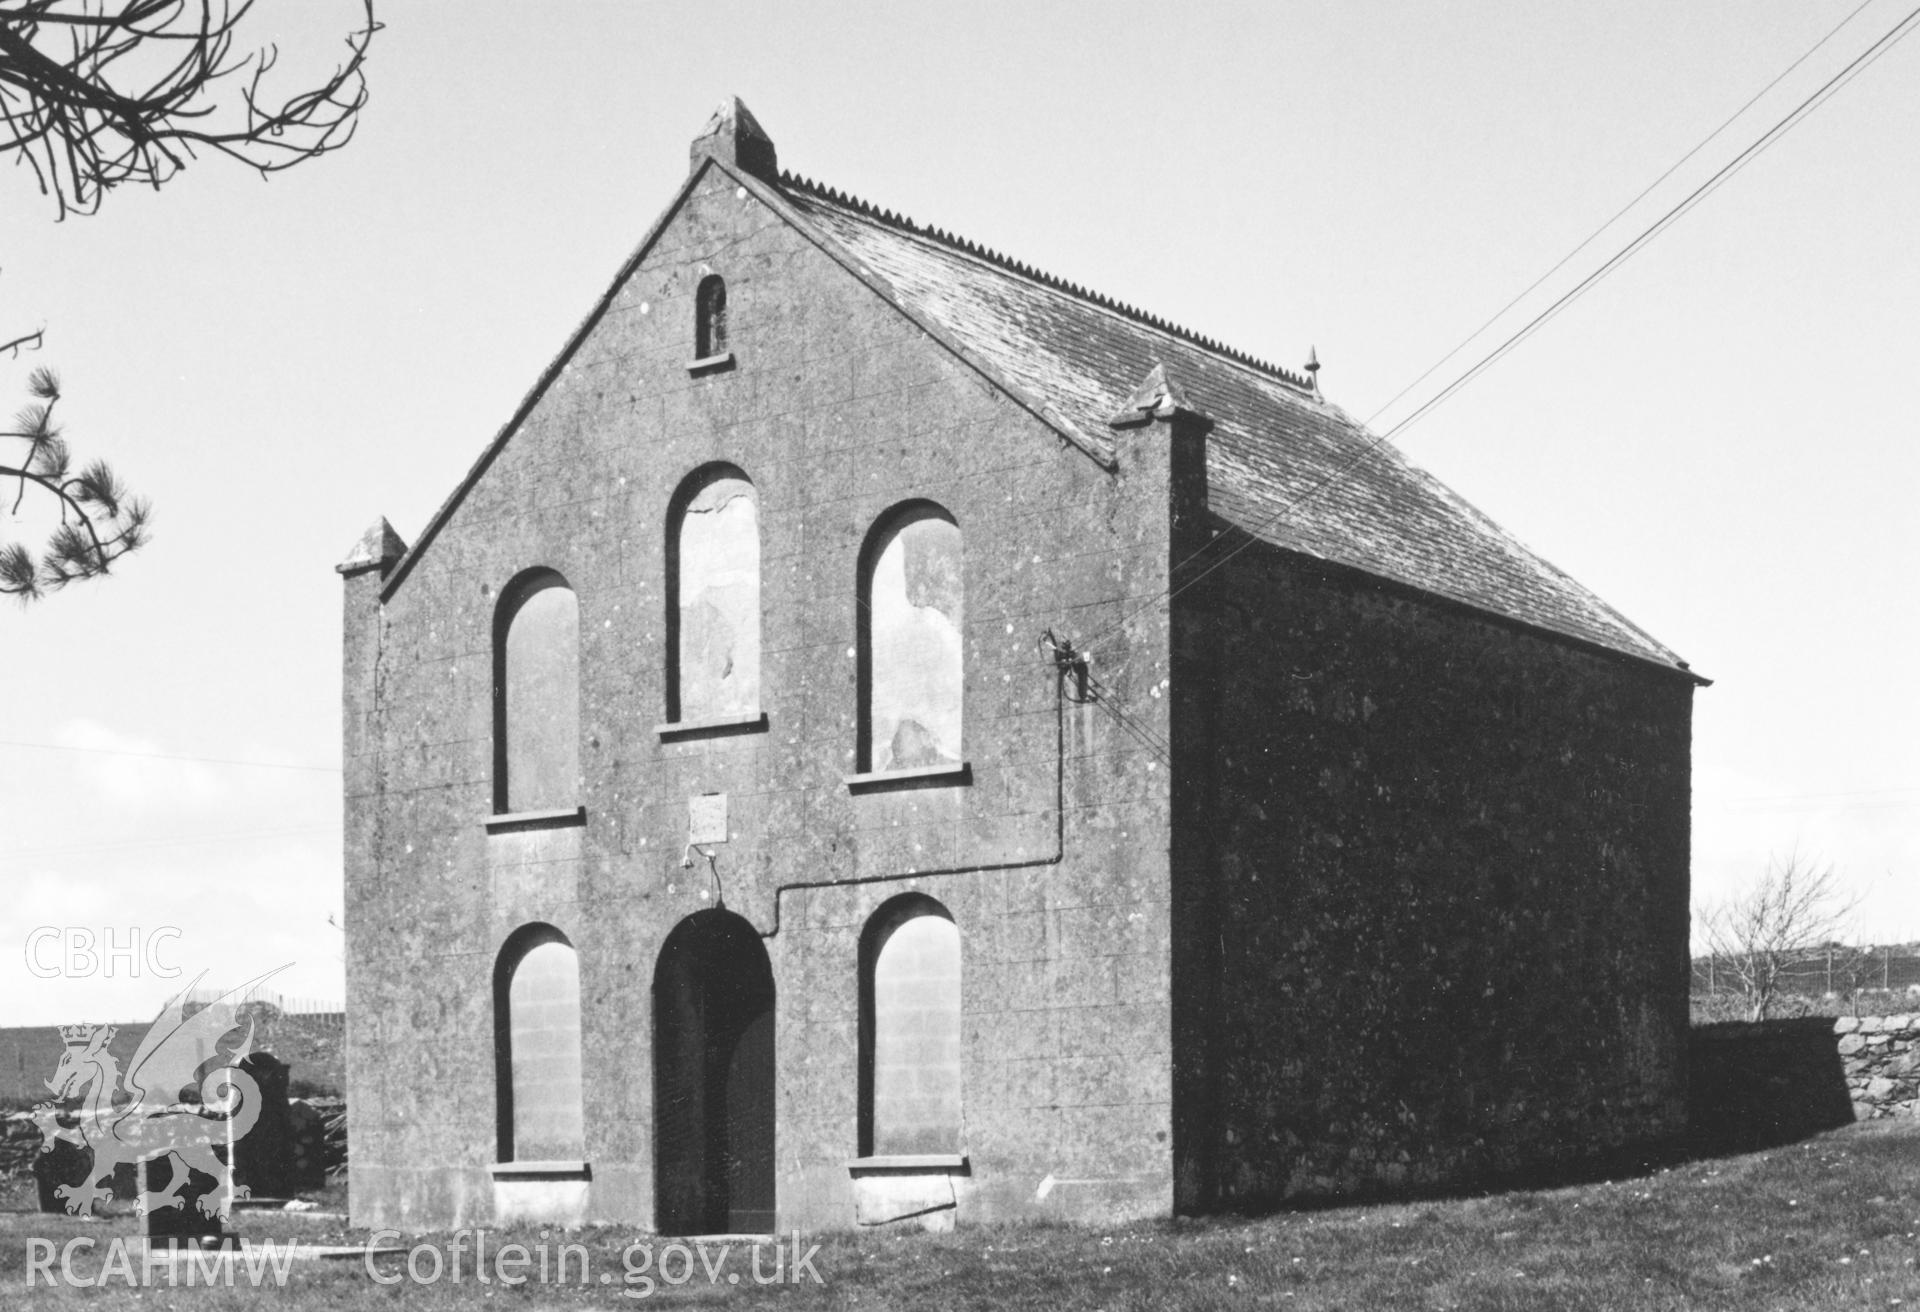 Digital copy of a black and white photograph showing an exterior view of Bethel Baptist Chapel, Treteio taken by Robert Scourfield, c.1996.